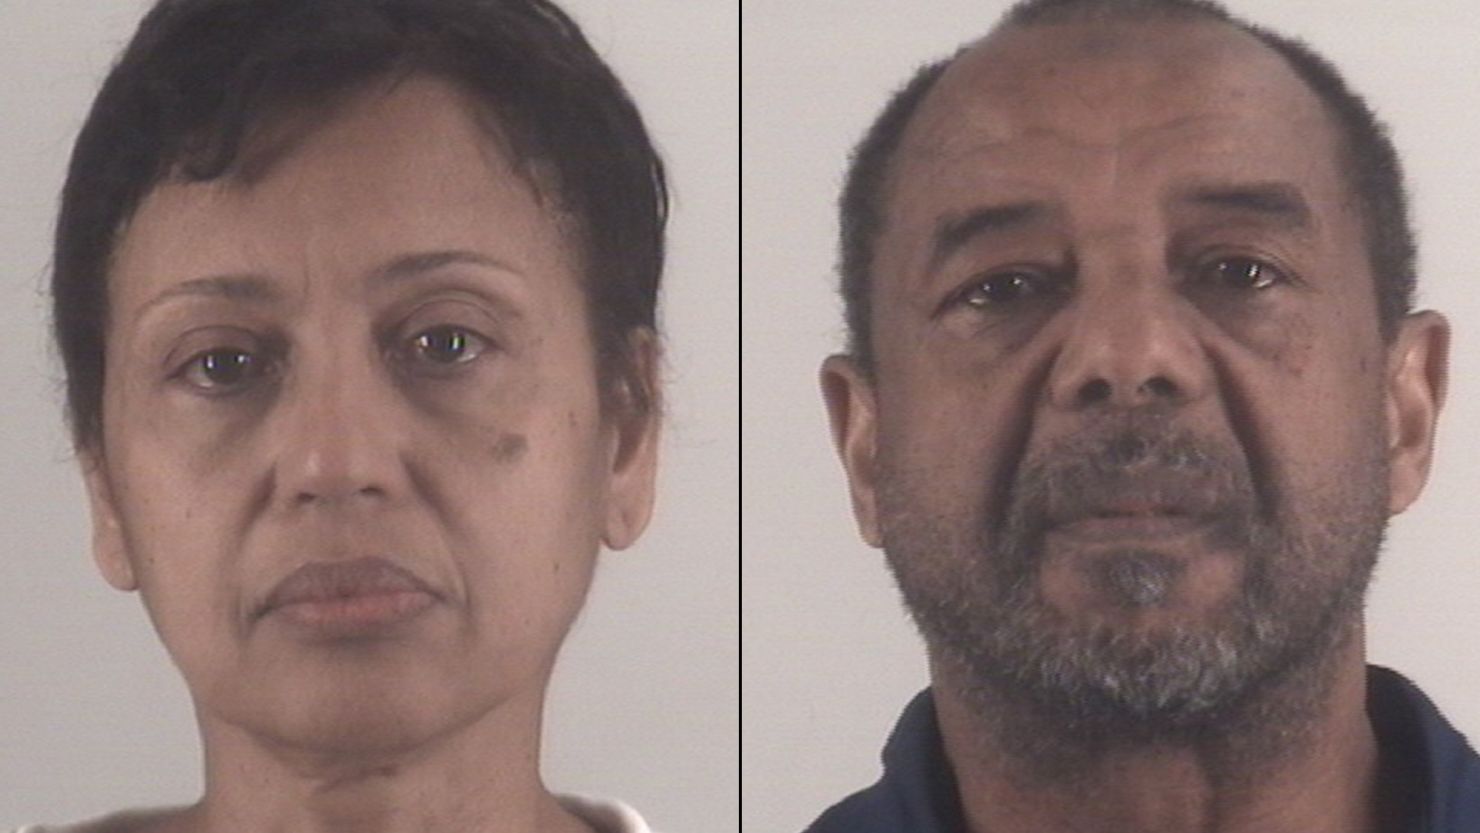 Denise Cros-Toure, left, and Mohamed Toure, right, have been sentenced to seven years each in prison.